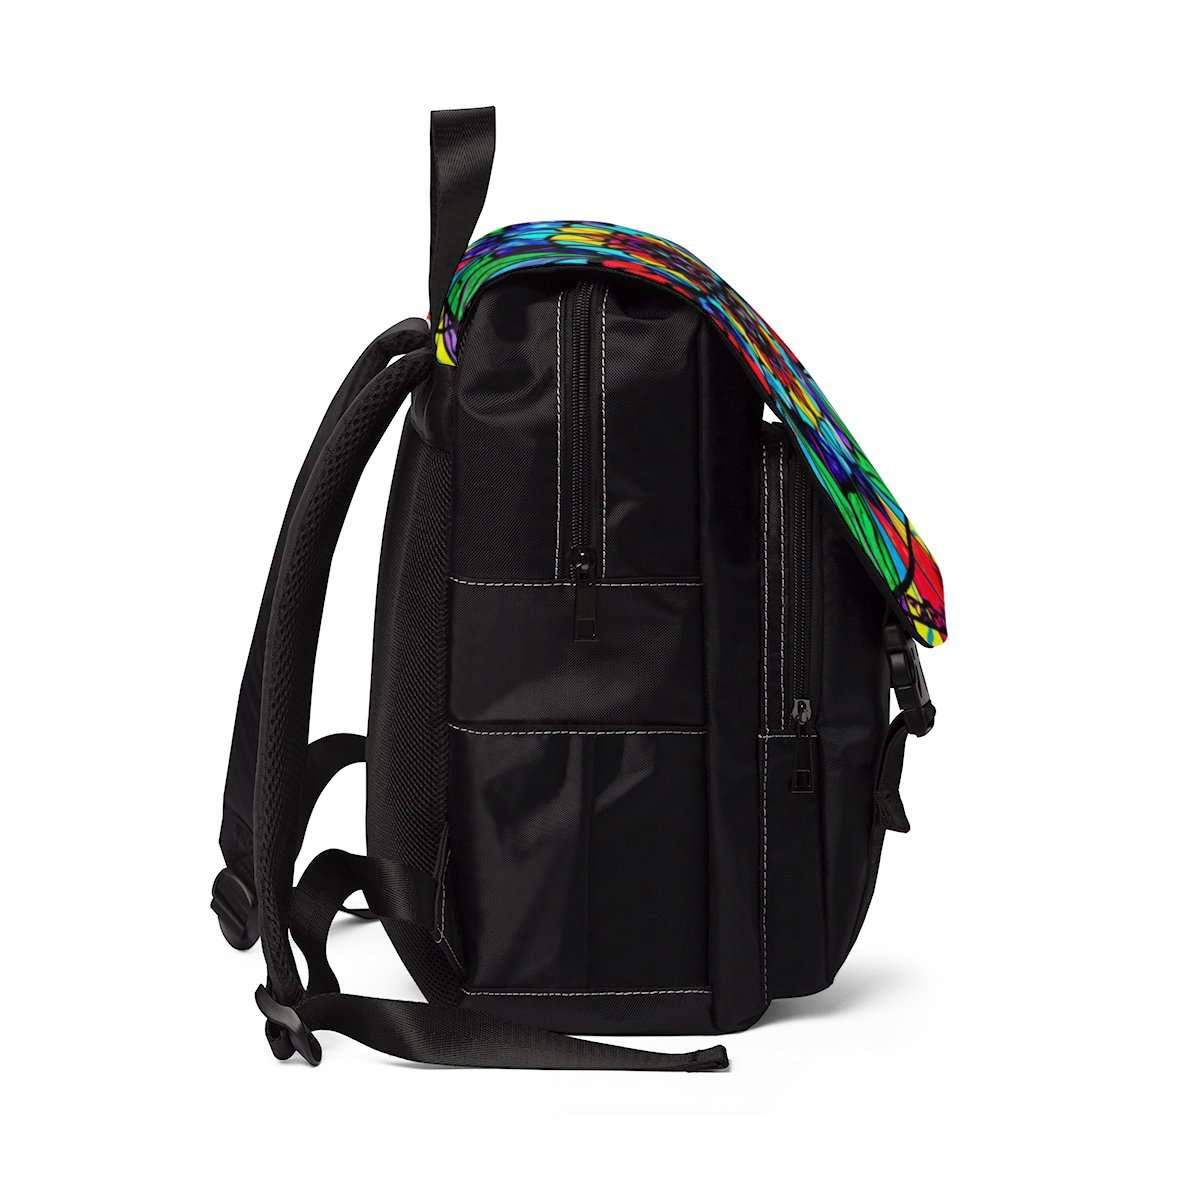 get-the-latest-in-sports-personal-expansion-unisex-casual-shoulder-backpack-online_1.jpg